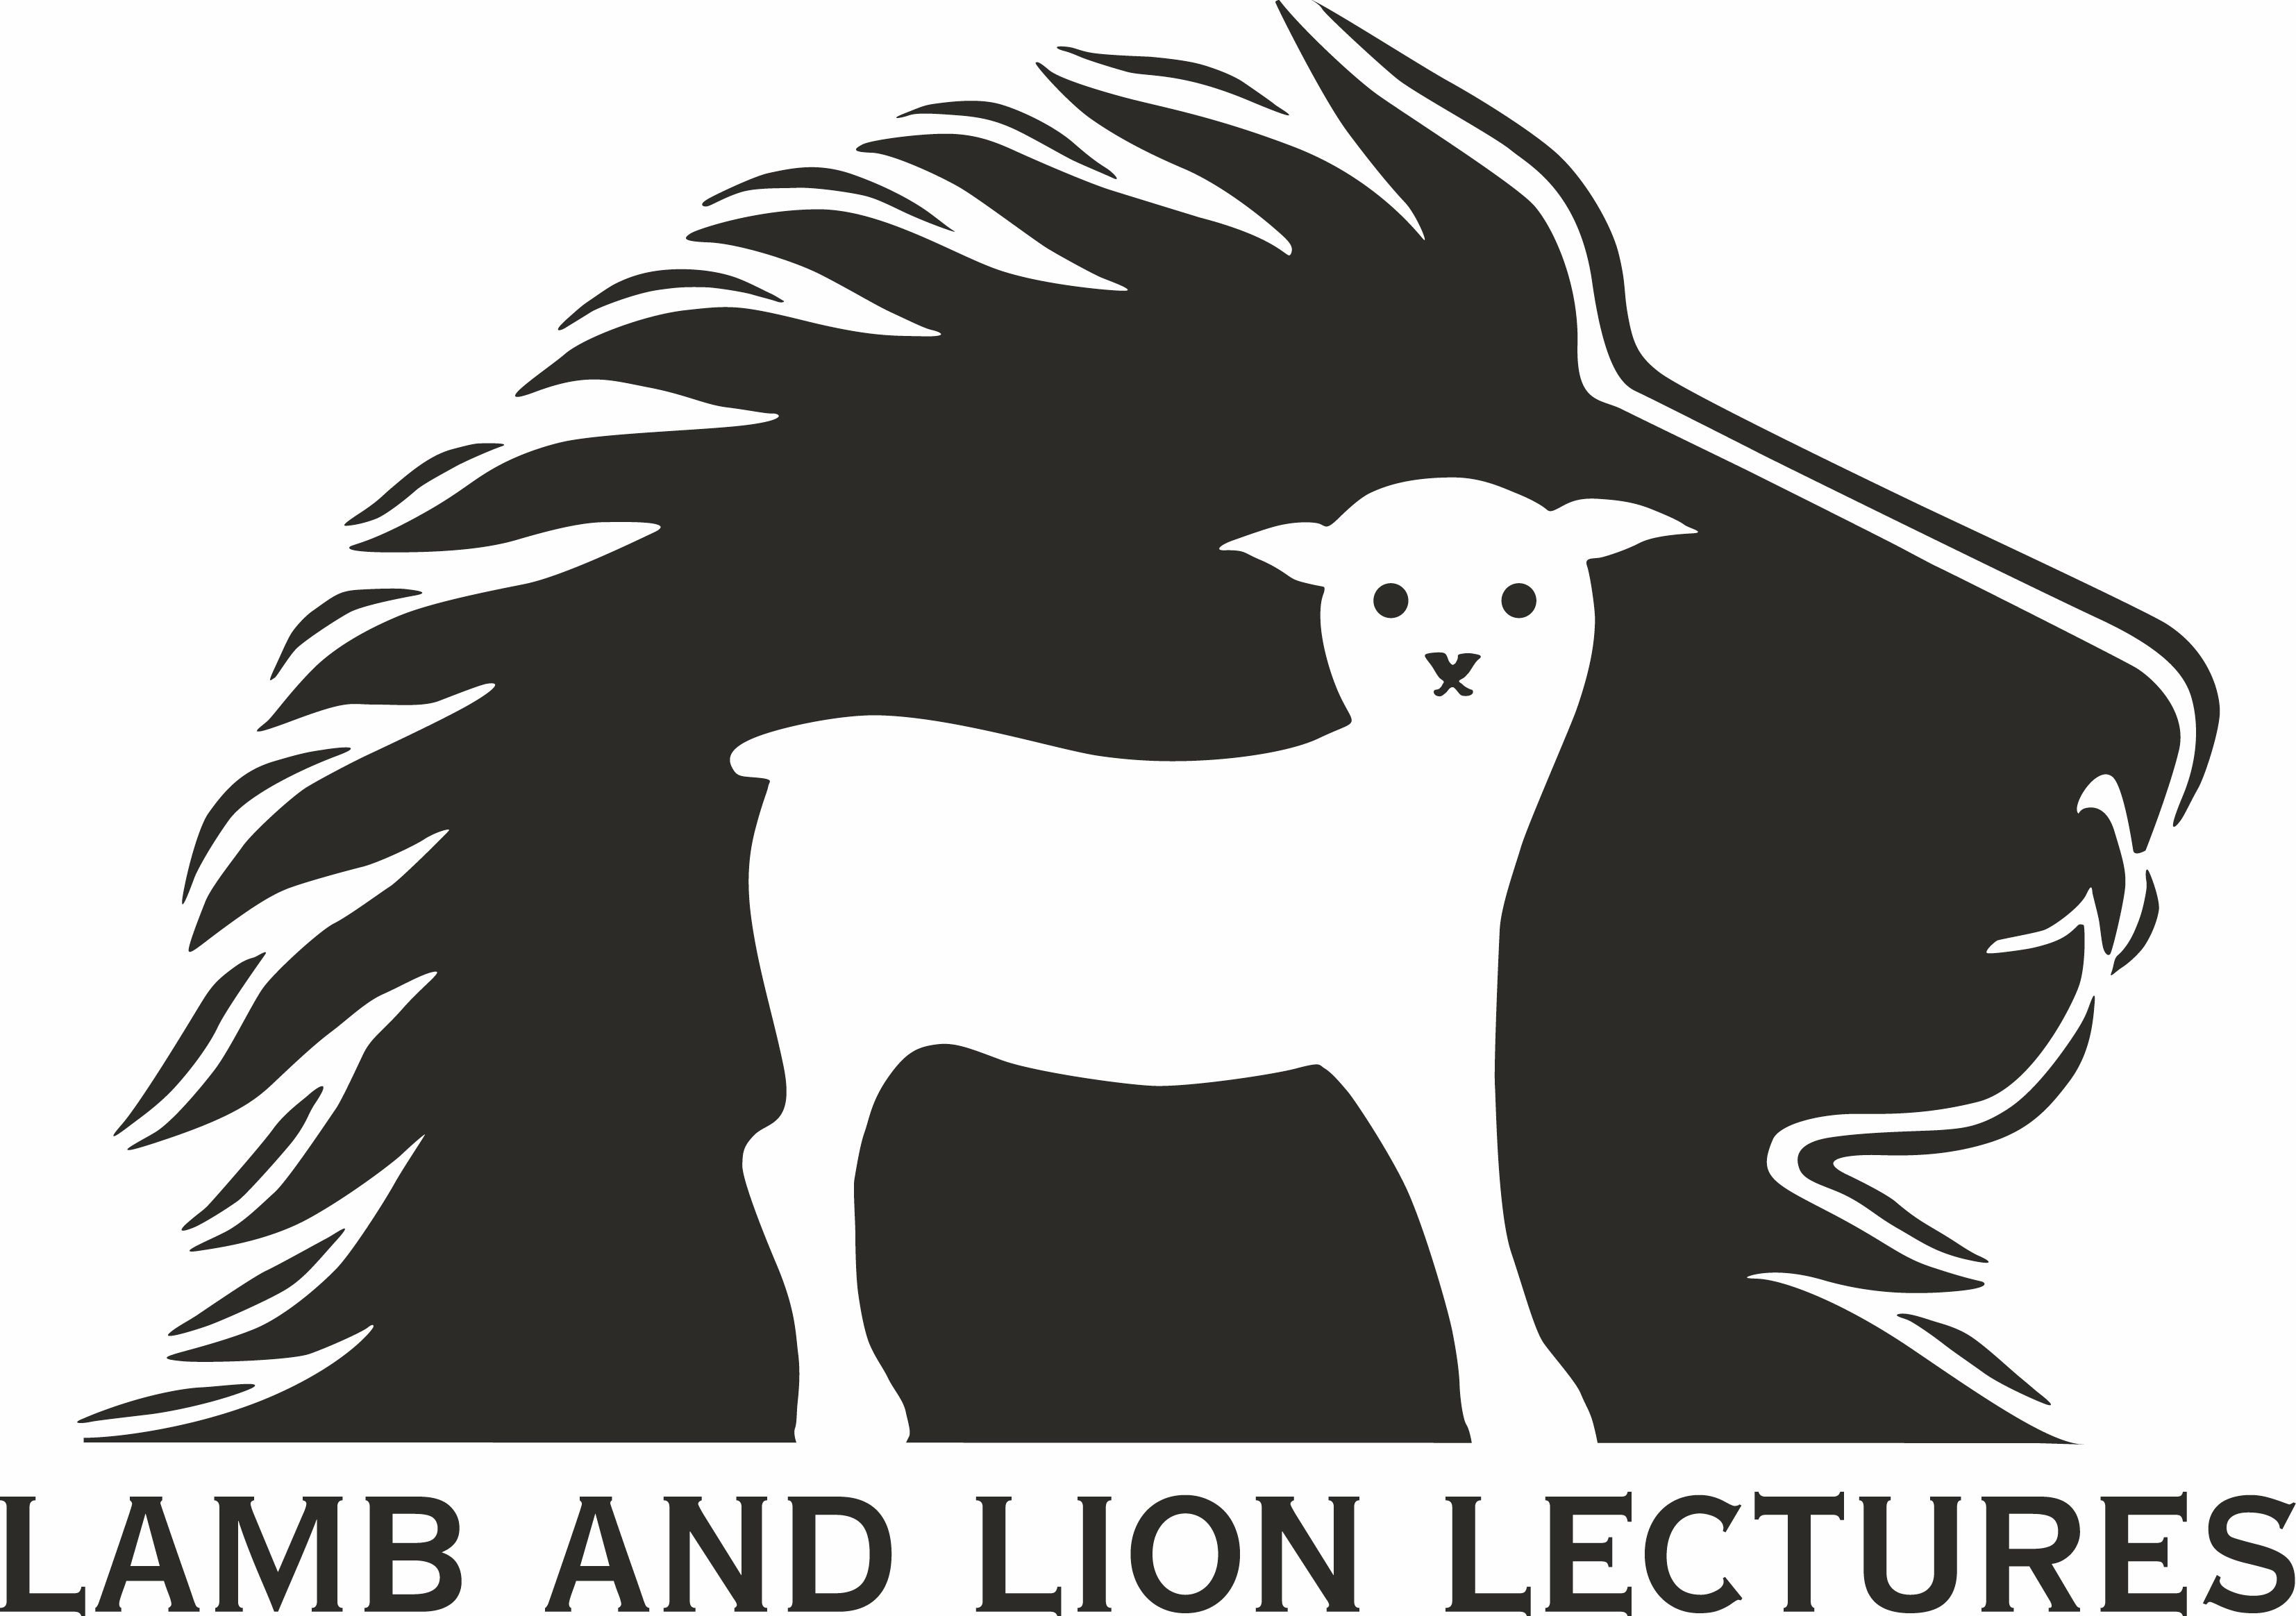 Lamb and Lion Lectures